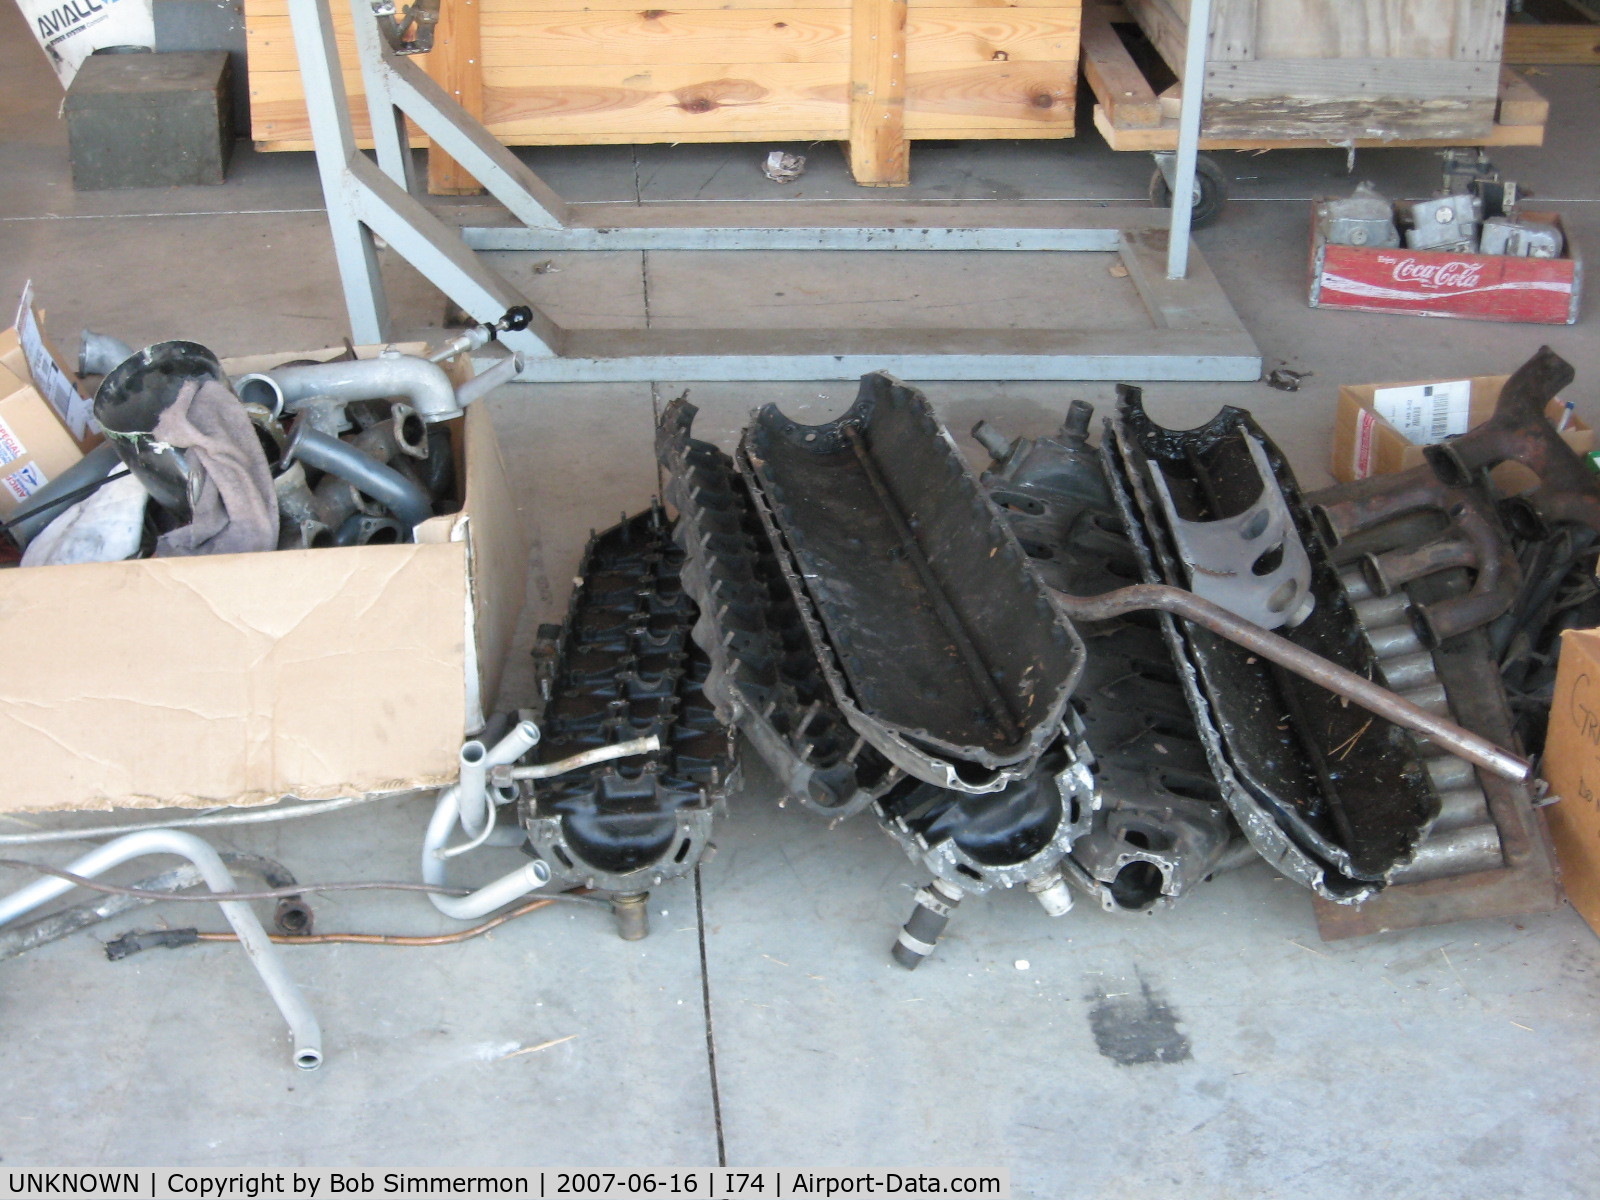 UNKNOWN, , Disassembled Ranger engines.  Part of Fairchild Model 24 project at Urbana, OH